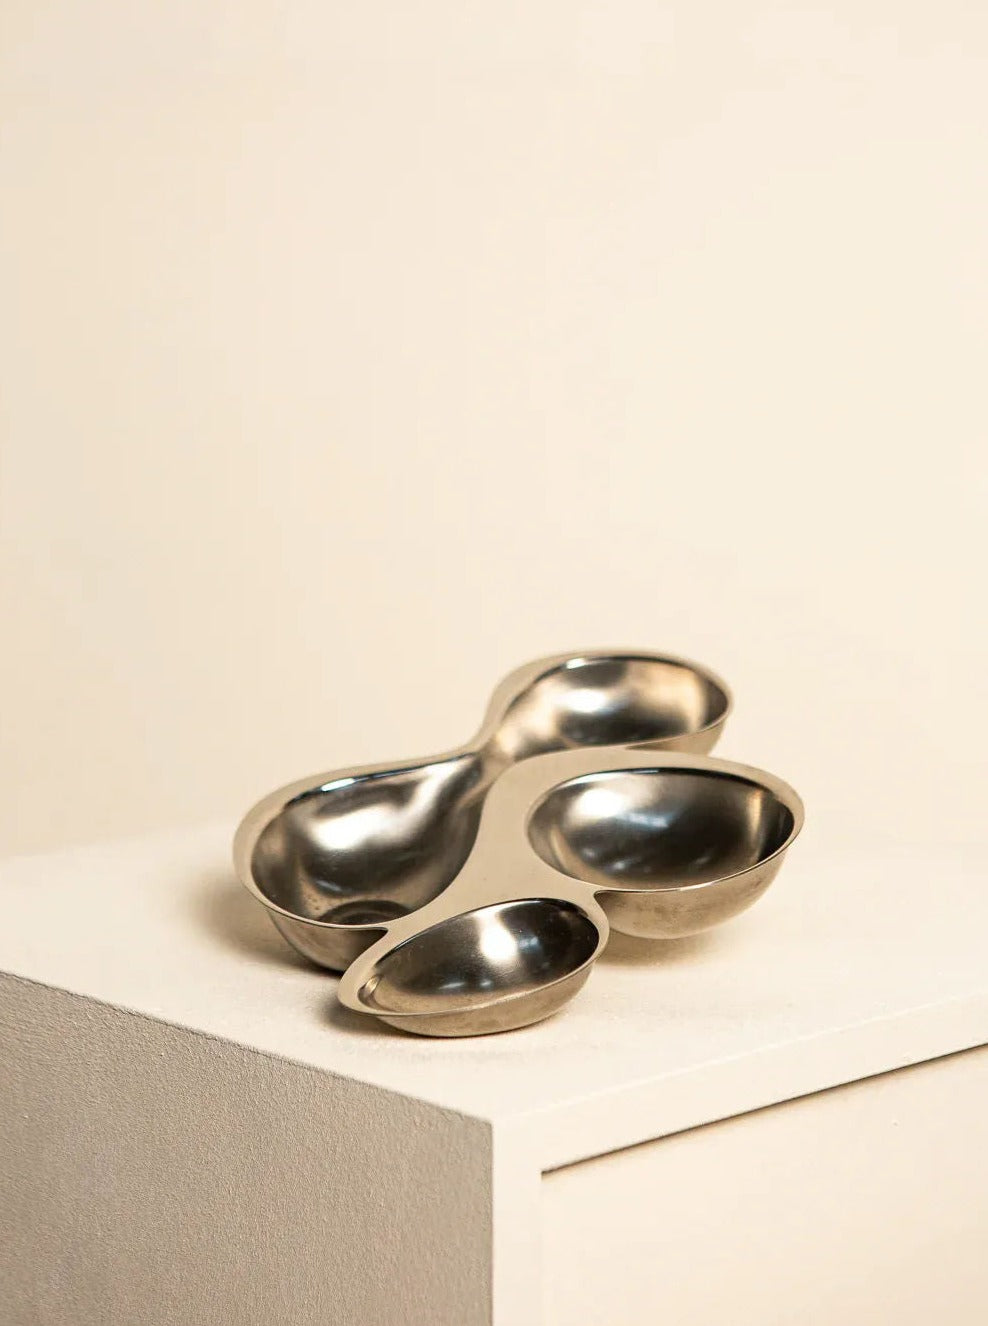 Stainless Steel Vide Poche by Ron Arad for Alessi